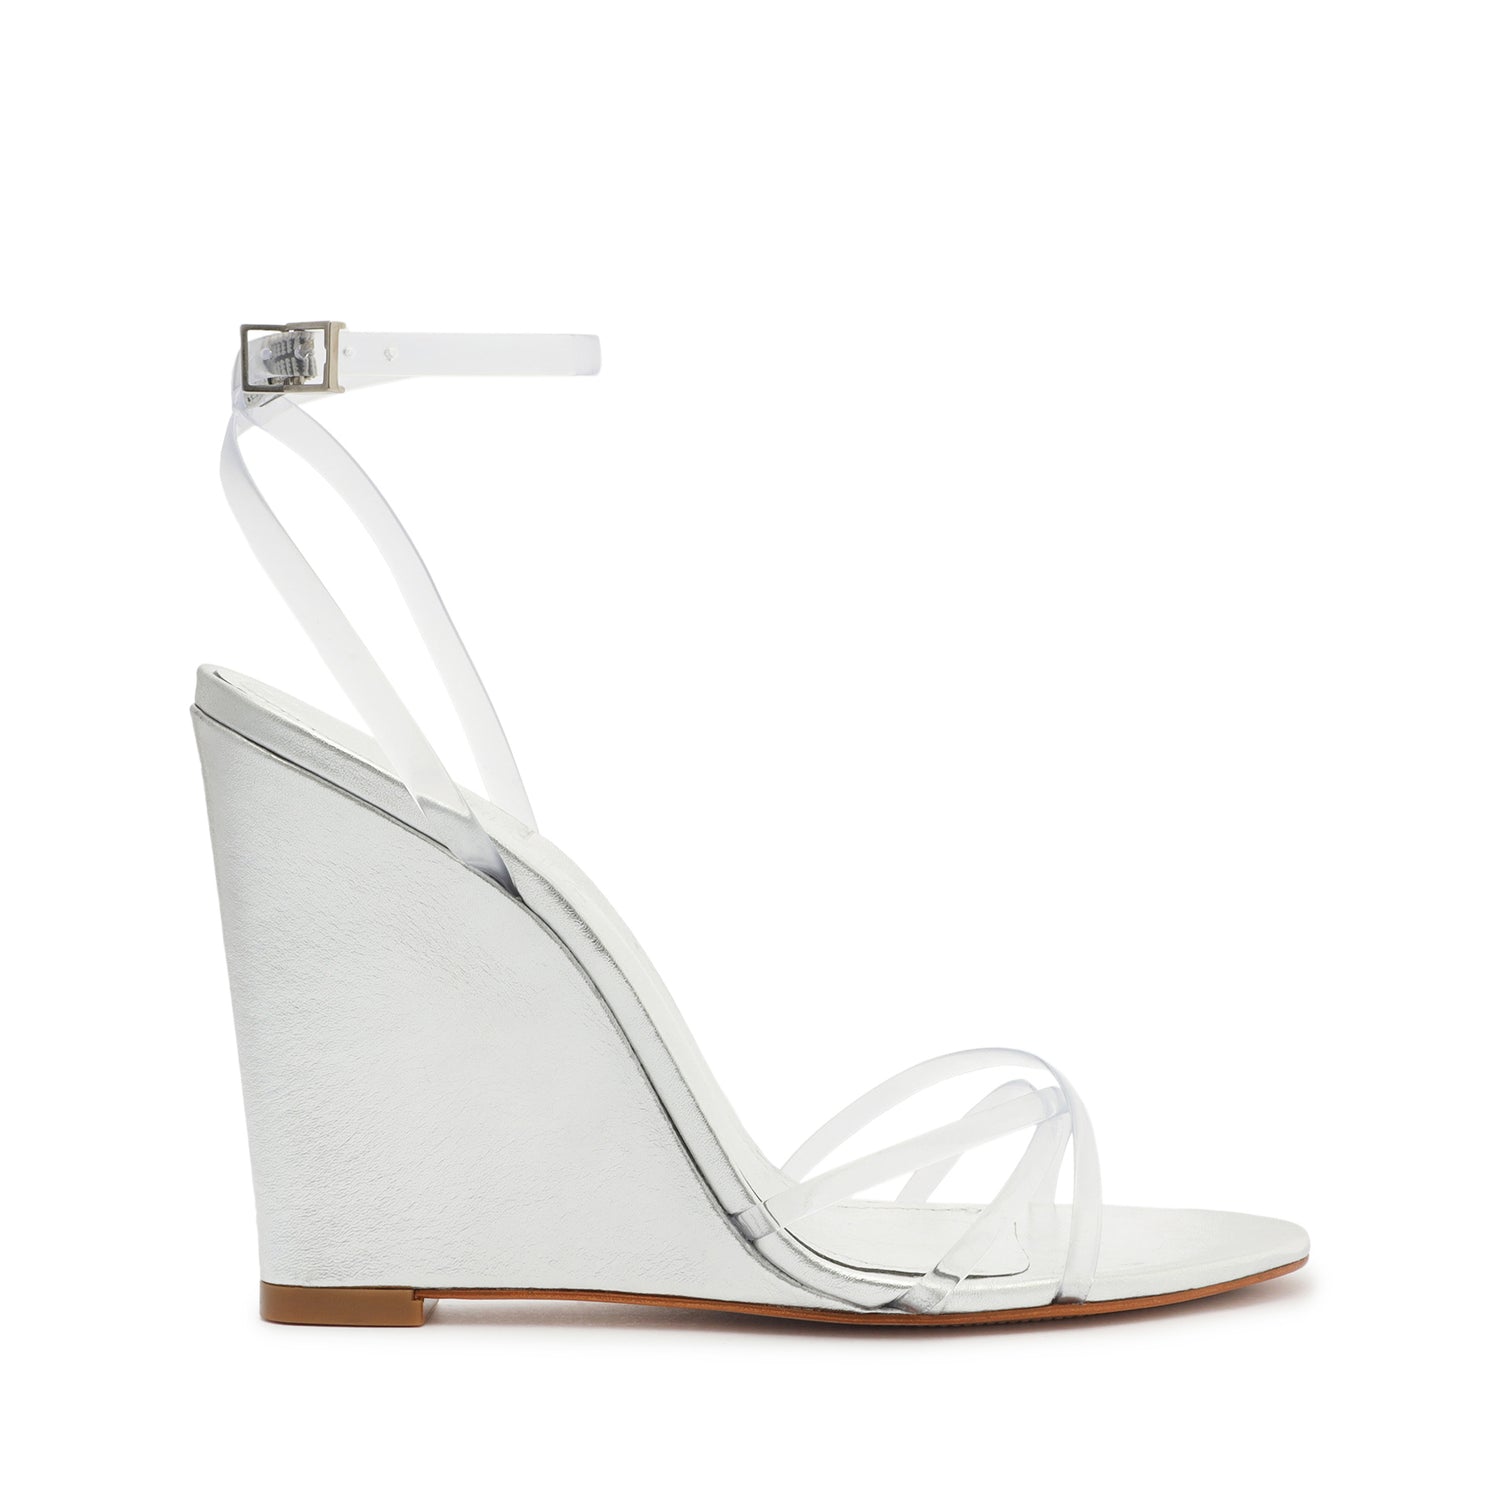 Amelia Leather Sandal Sandals High Summer 23 5 Silver Leather - Schutz Shoes